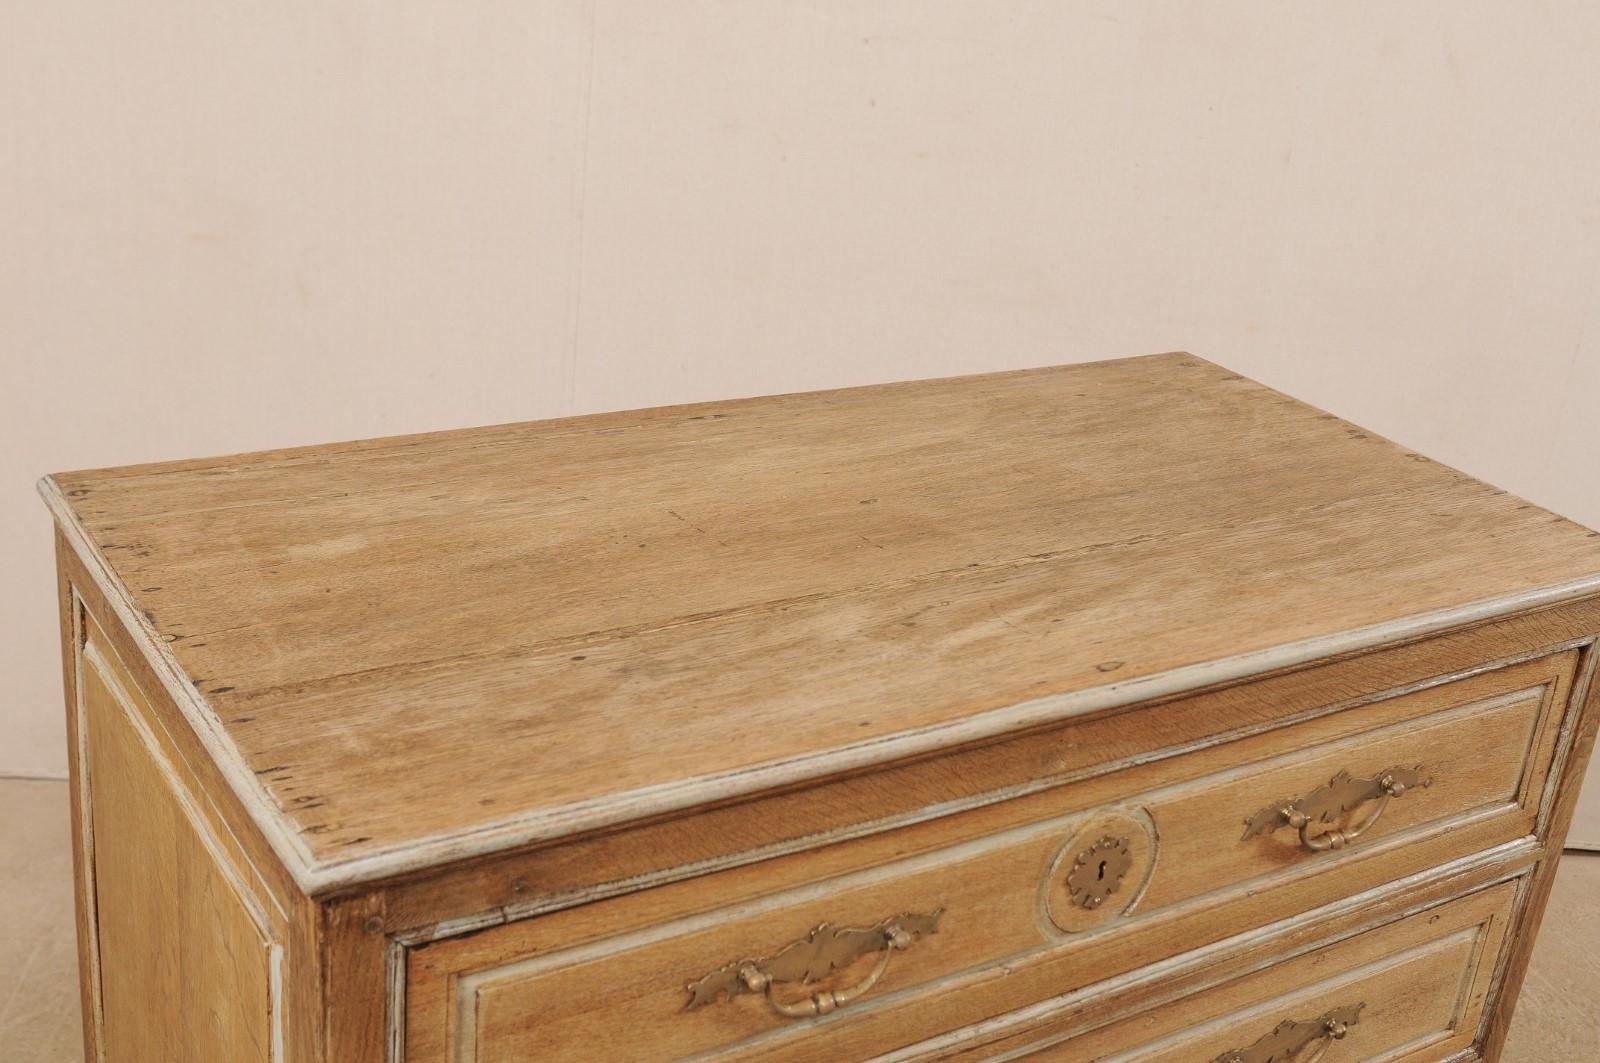 19th Century French Wood Chest of Drawers with Wonderfully Scalloped Skirt (Geschnitzt)